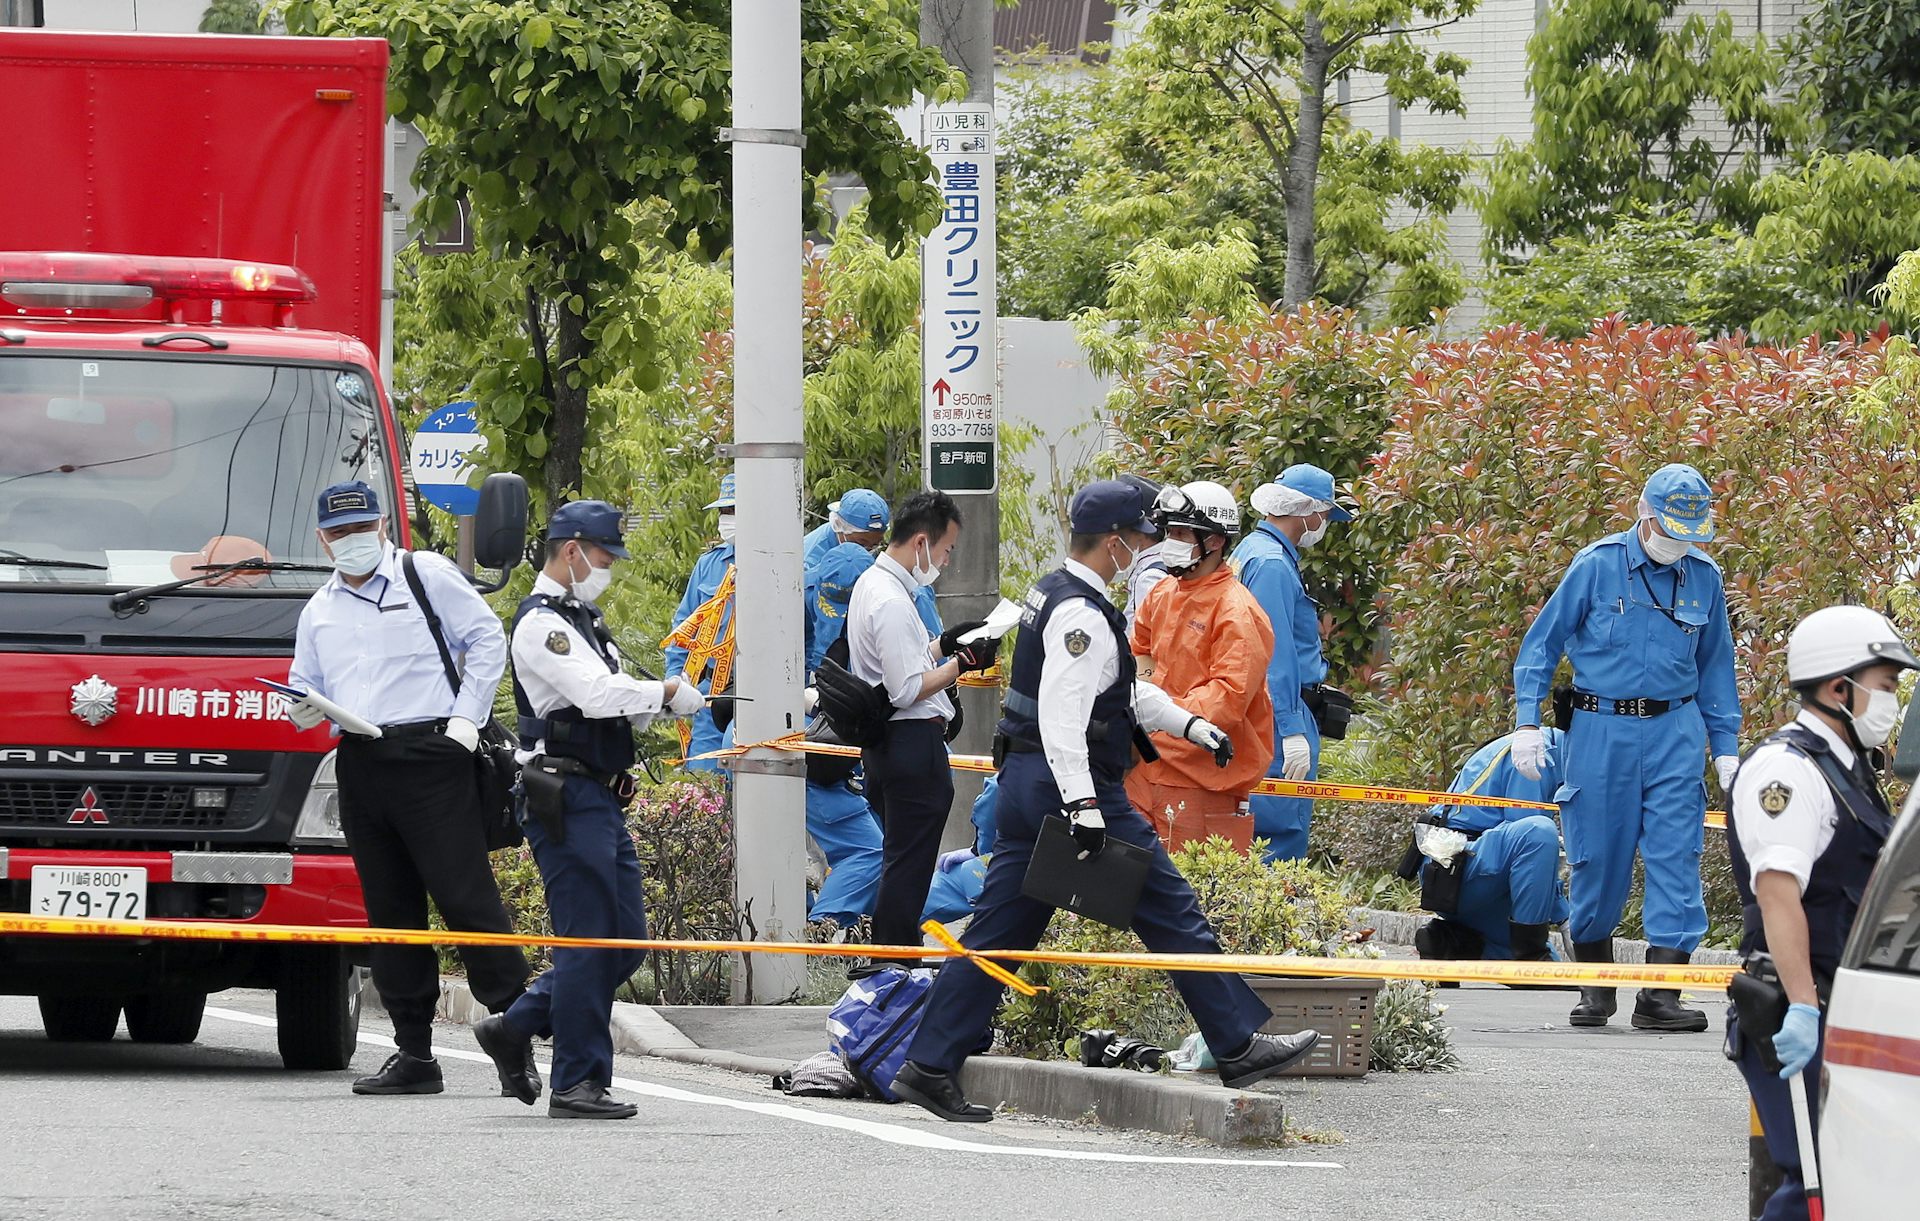 Despite Japan's low crime rates, it's seen a number of mass